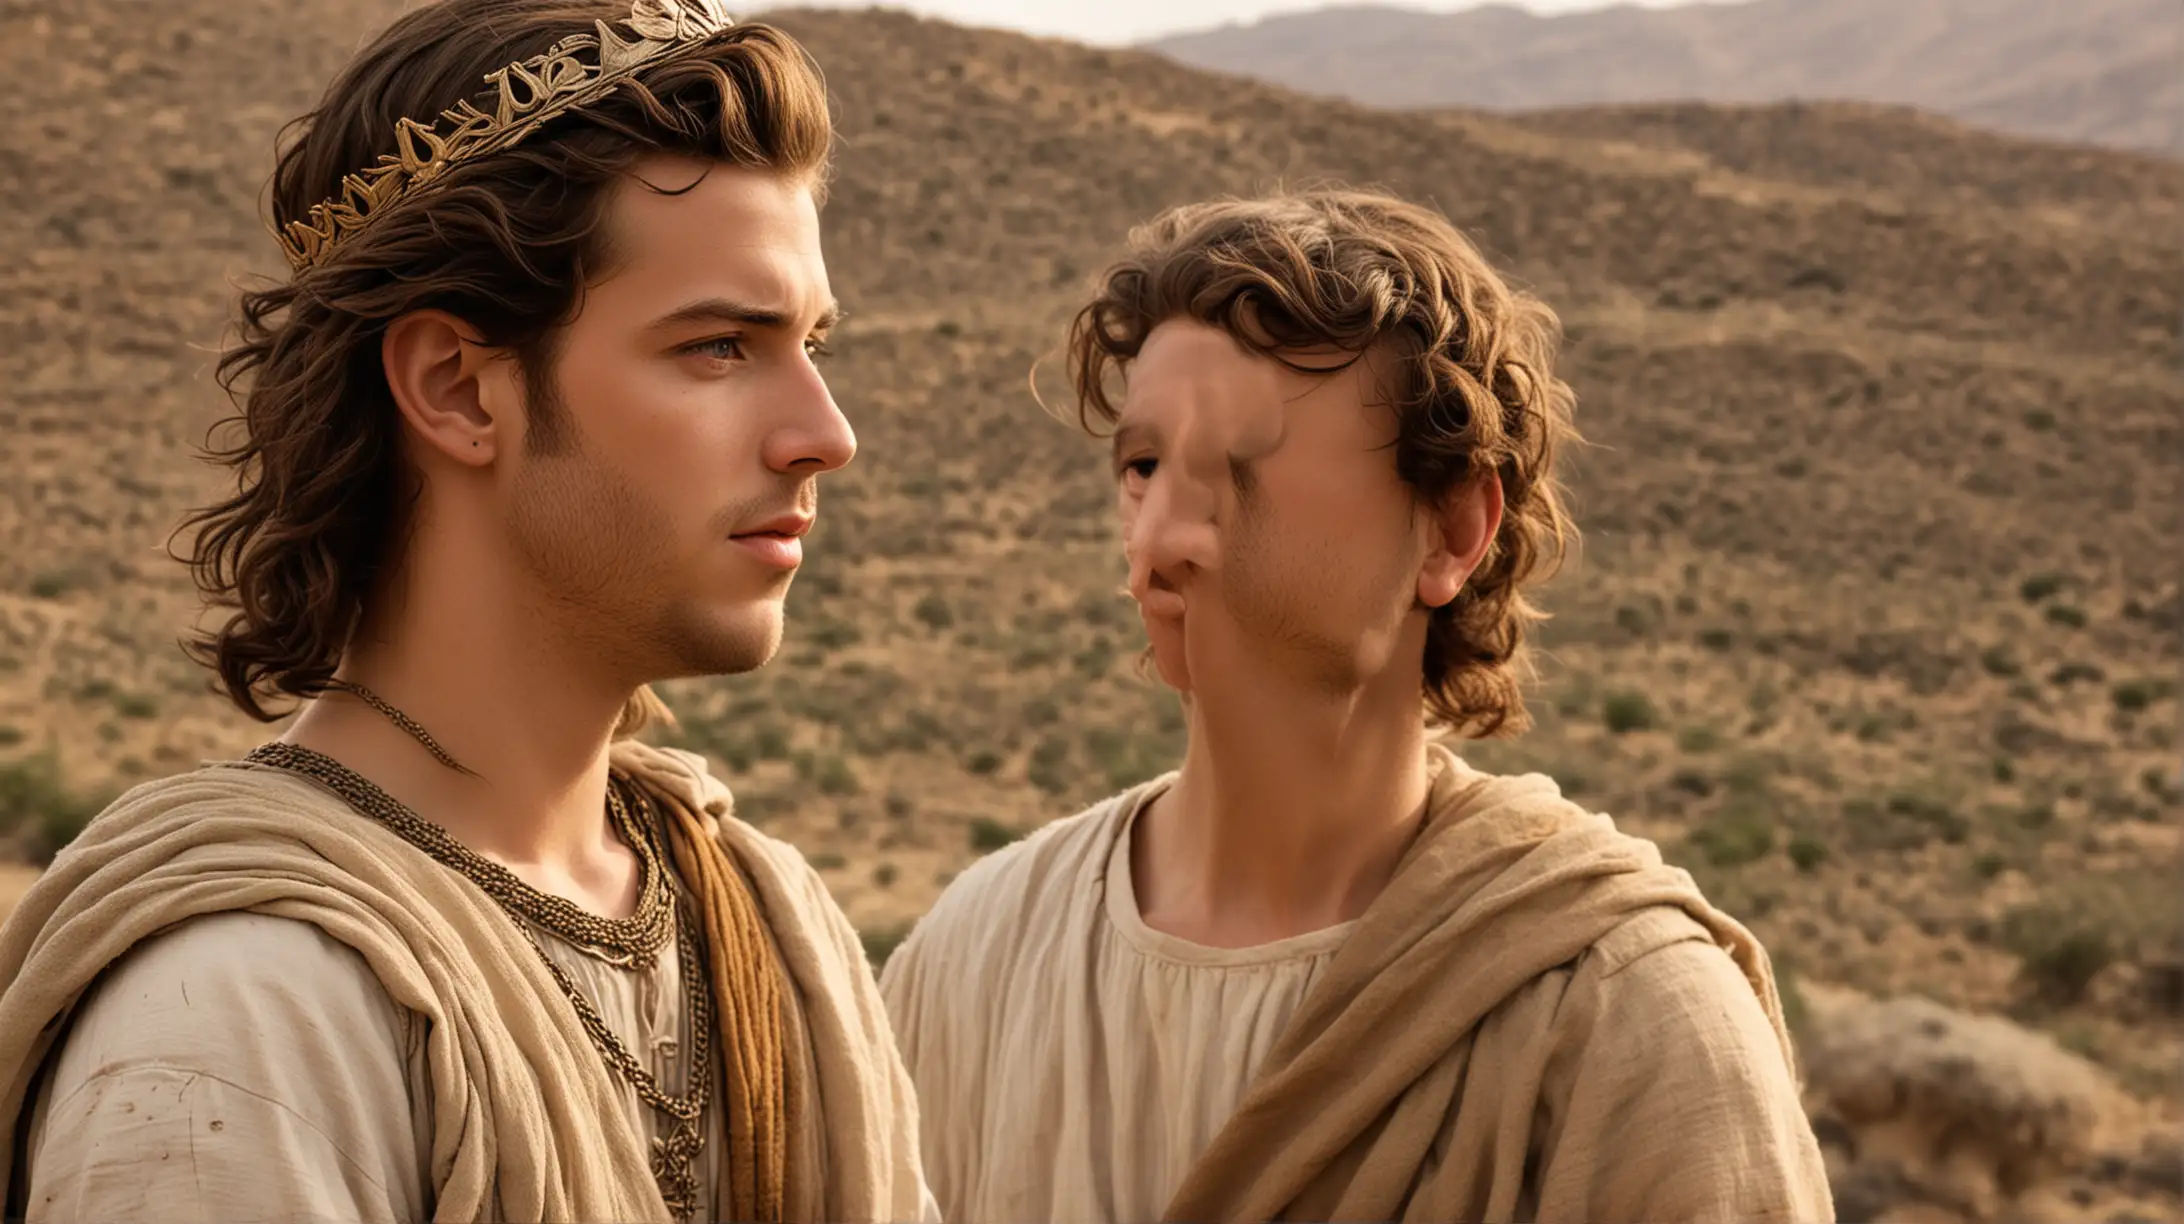 A close up of a young handsome Biblical King David standing on a desert hilly field talking to his friend Jonathon. Set during the Biblical Era of King David.